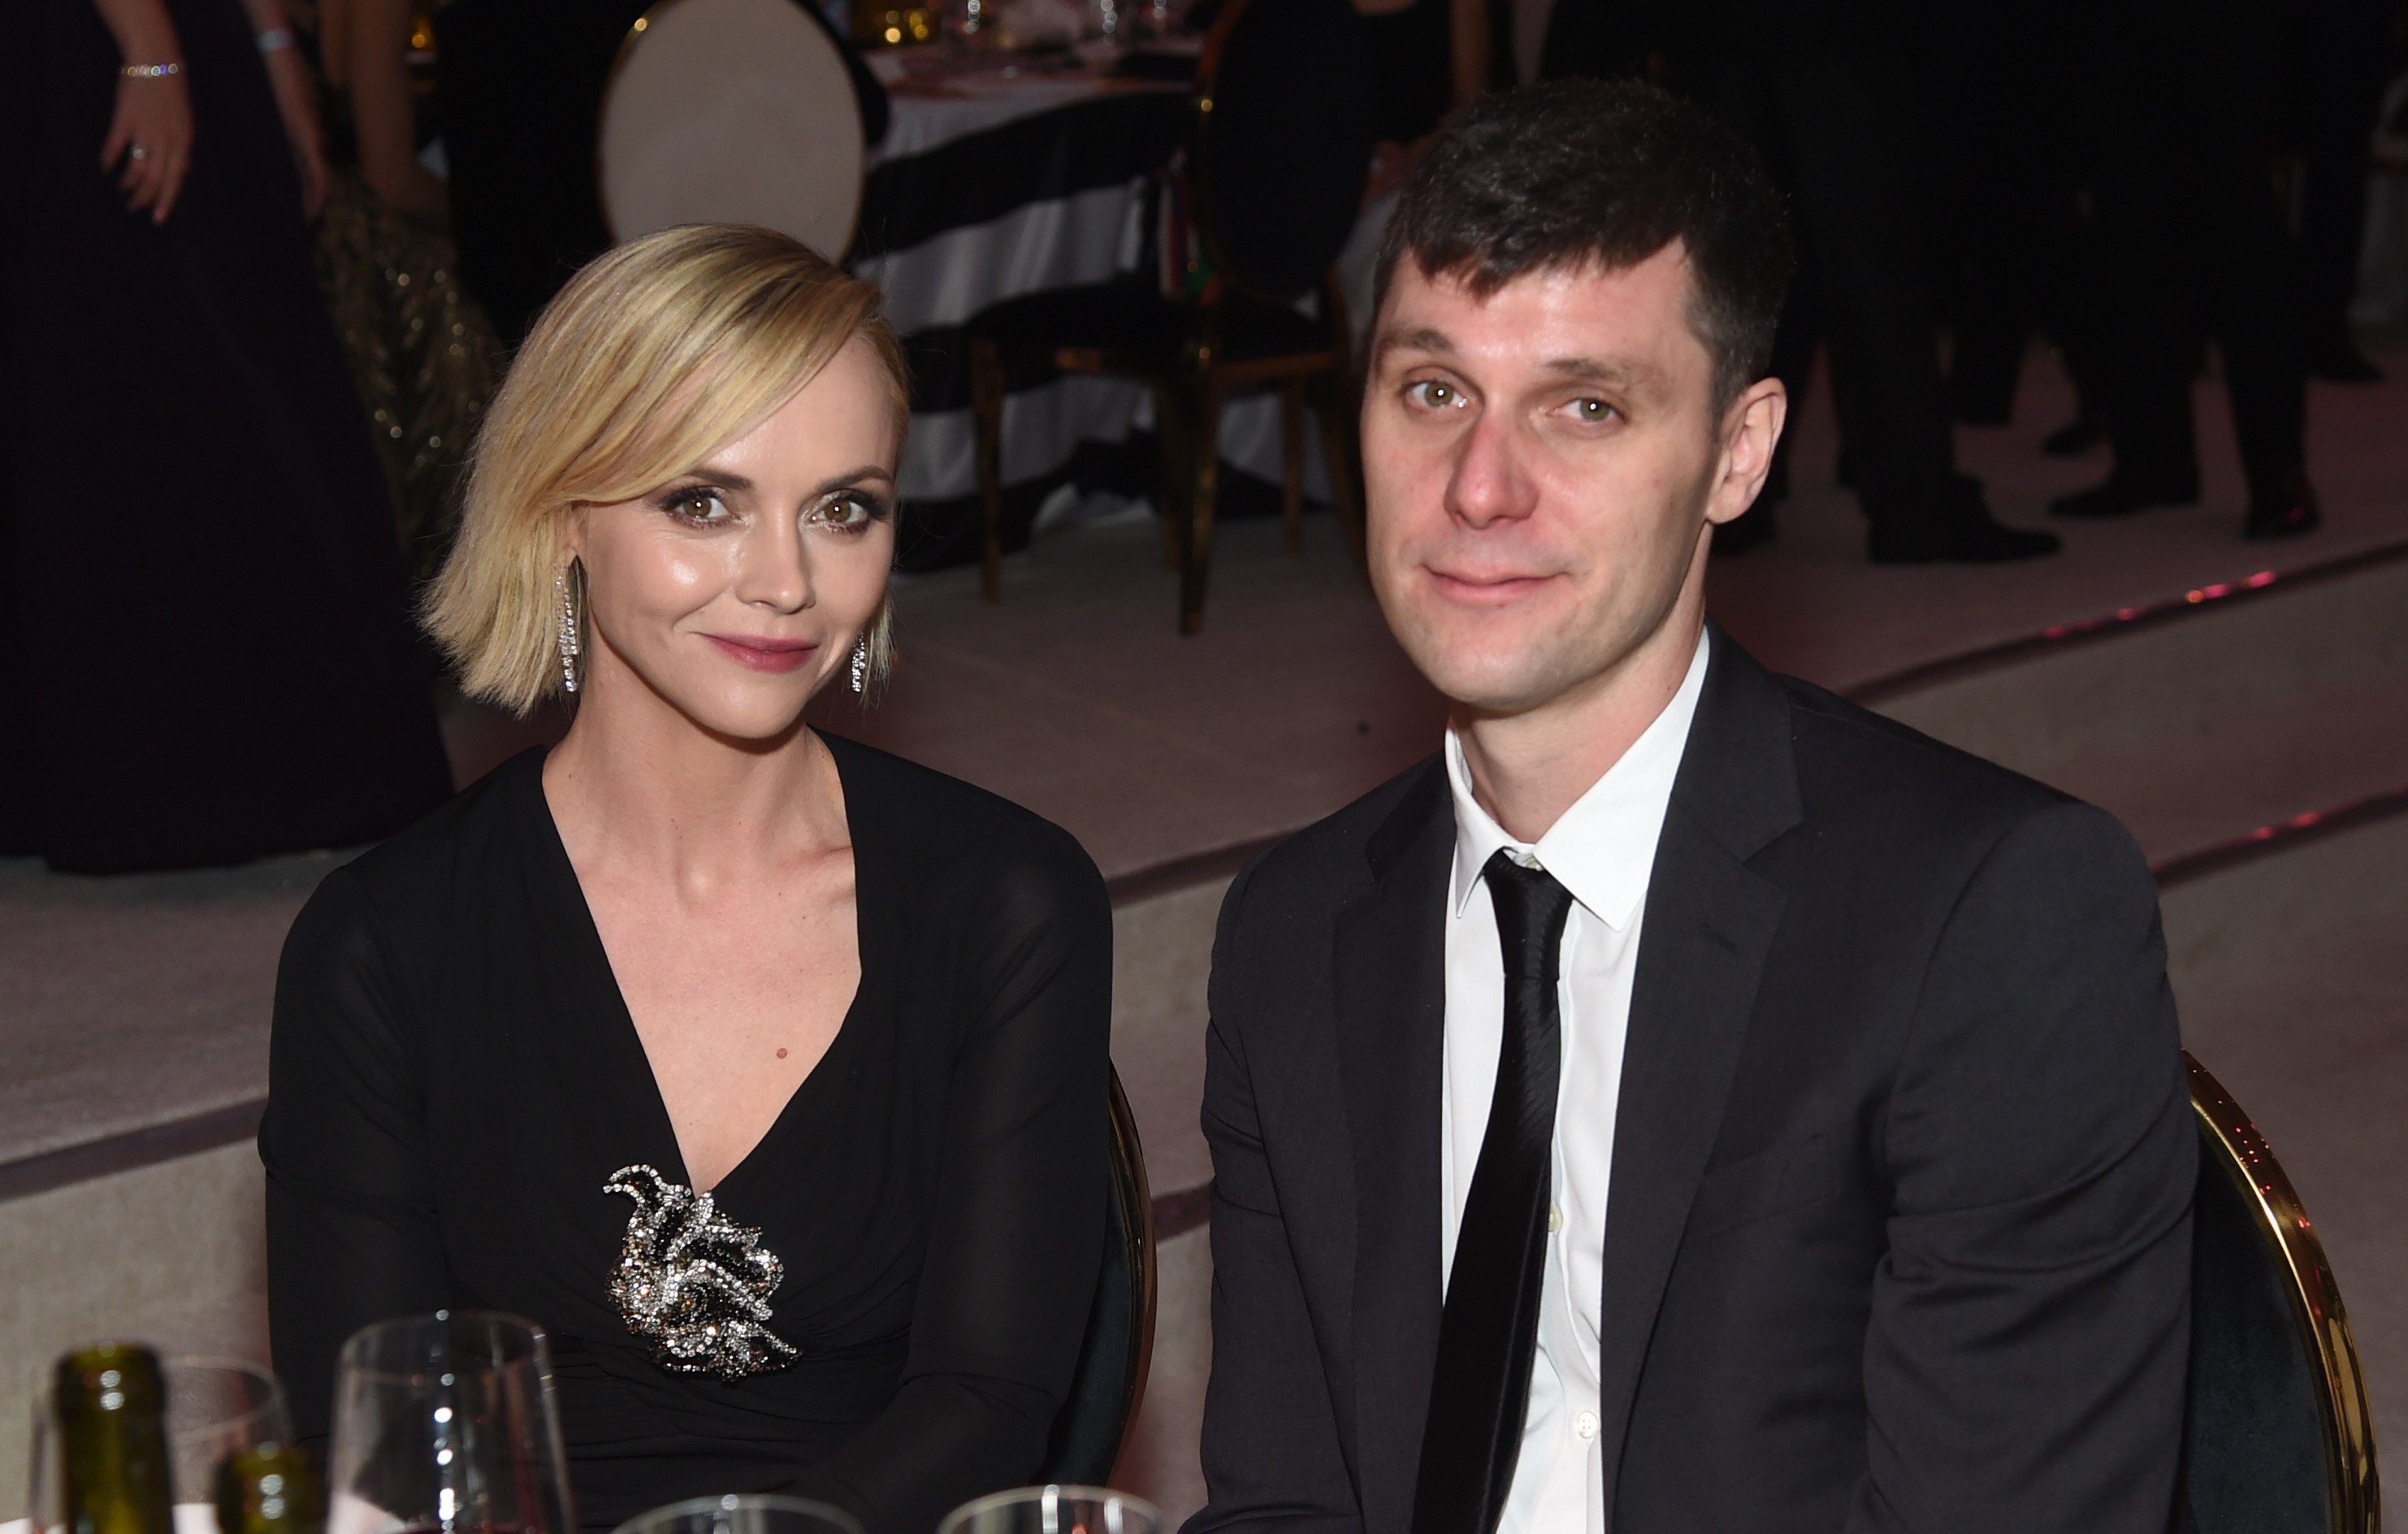 Christina Ricci and James Heerdegen attend the 27th annual Elton John AIDS Foundation Academy Awards Viewing Party sponsored by IMDb and Neuro Drinks celebrating EJAF and the 91st Academy Awards on February 24, 2019, in West Hollywood, California. | Source: Getty Images